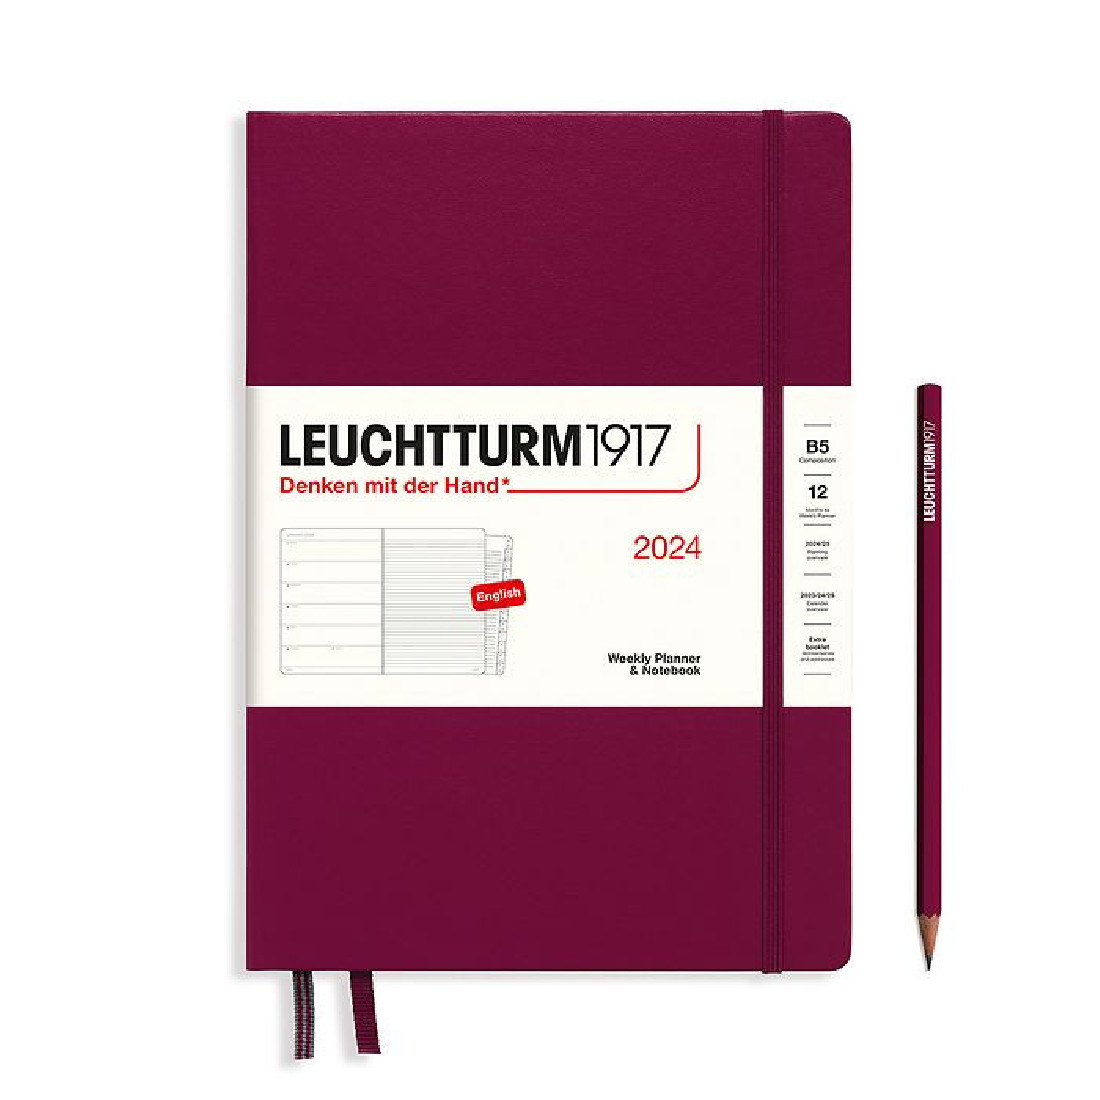 Leuchtturm 1917 Weekly Planner and Notebook 2024 Port Red B5 Hard Cover